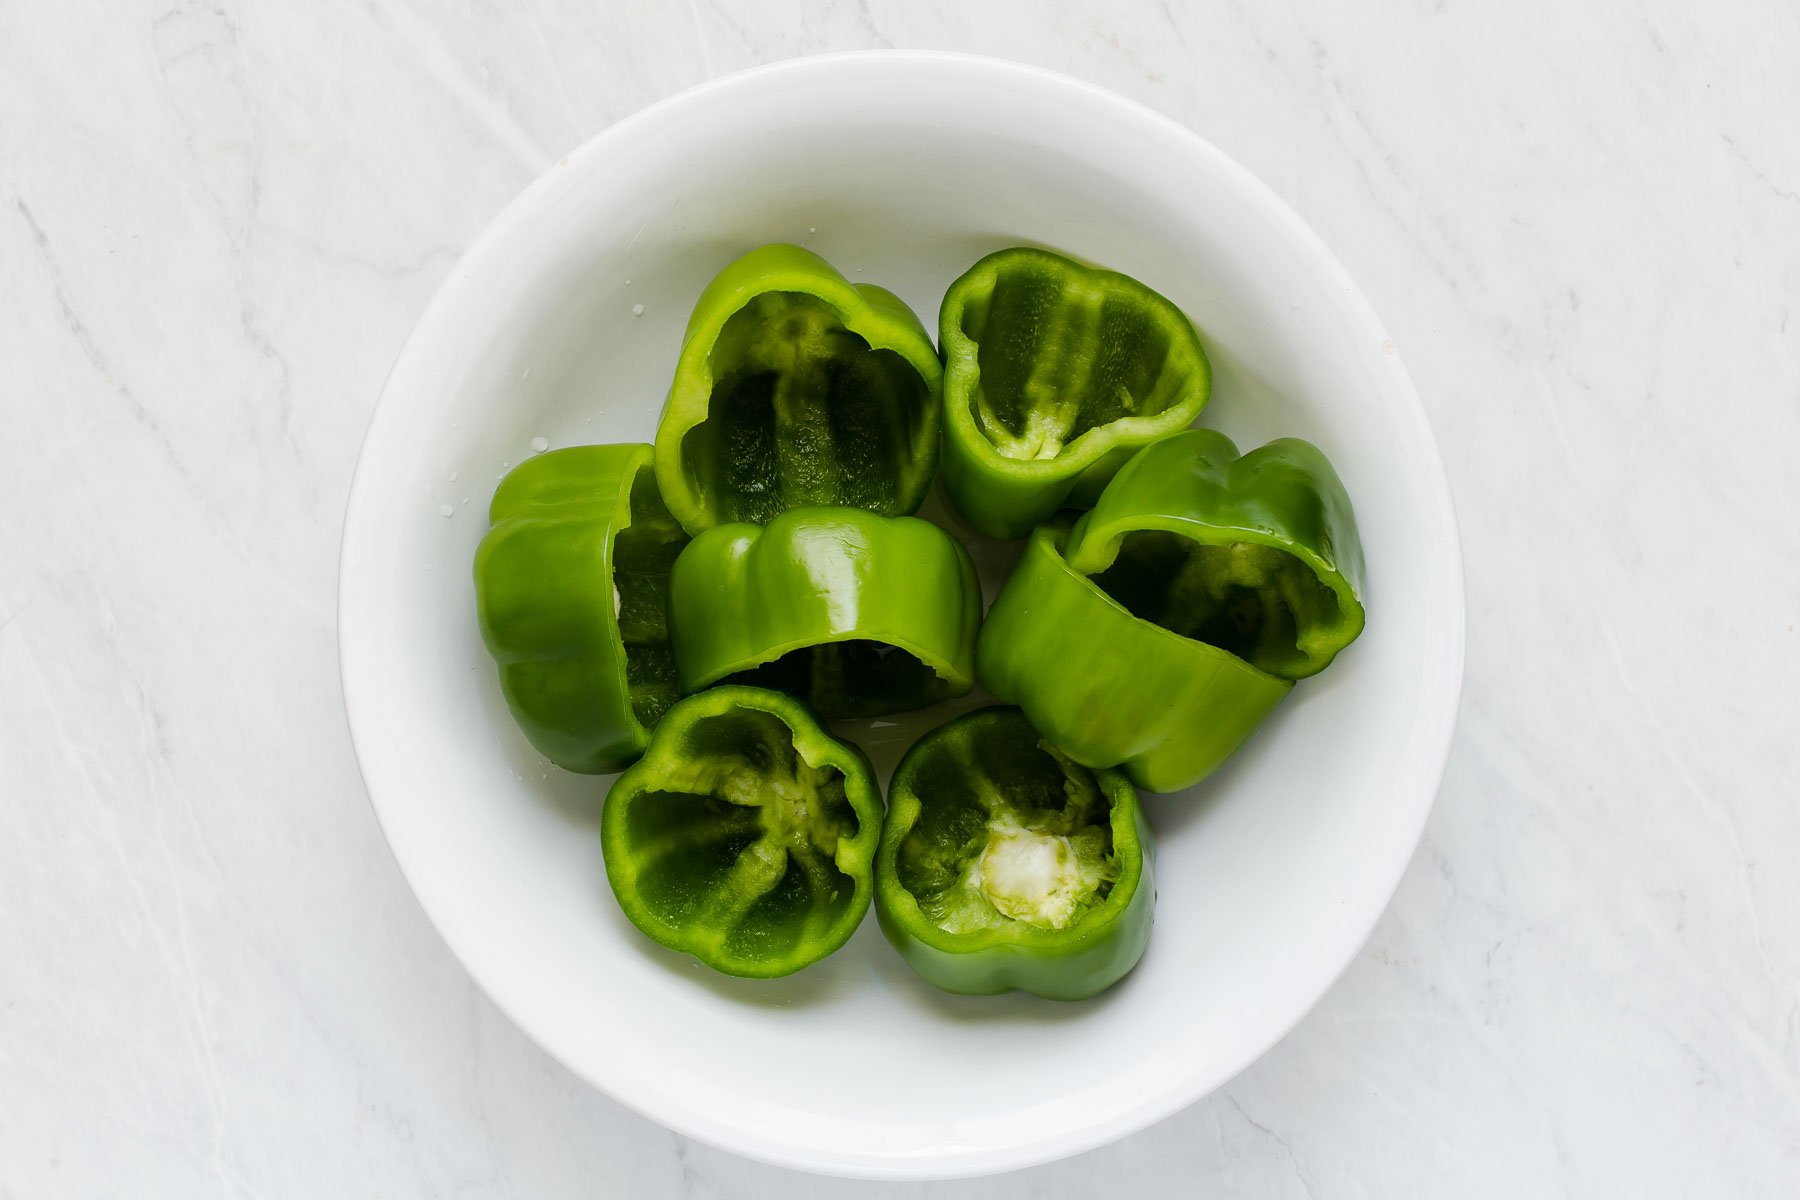 Eight green bell peppers, cut in half, cleaned and placed in a white bowl.